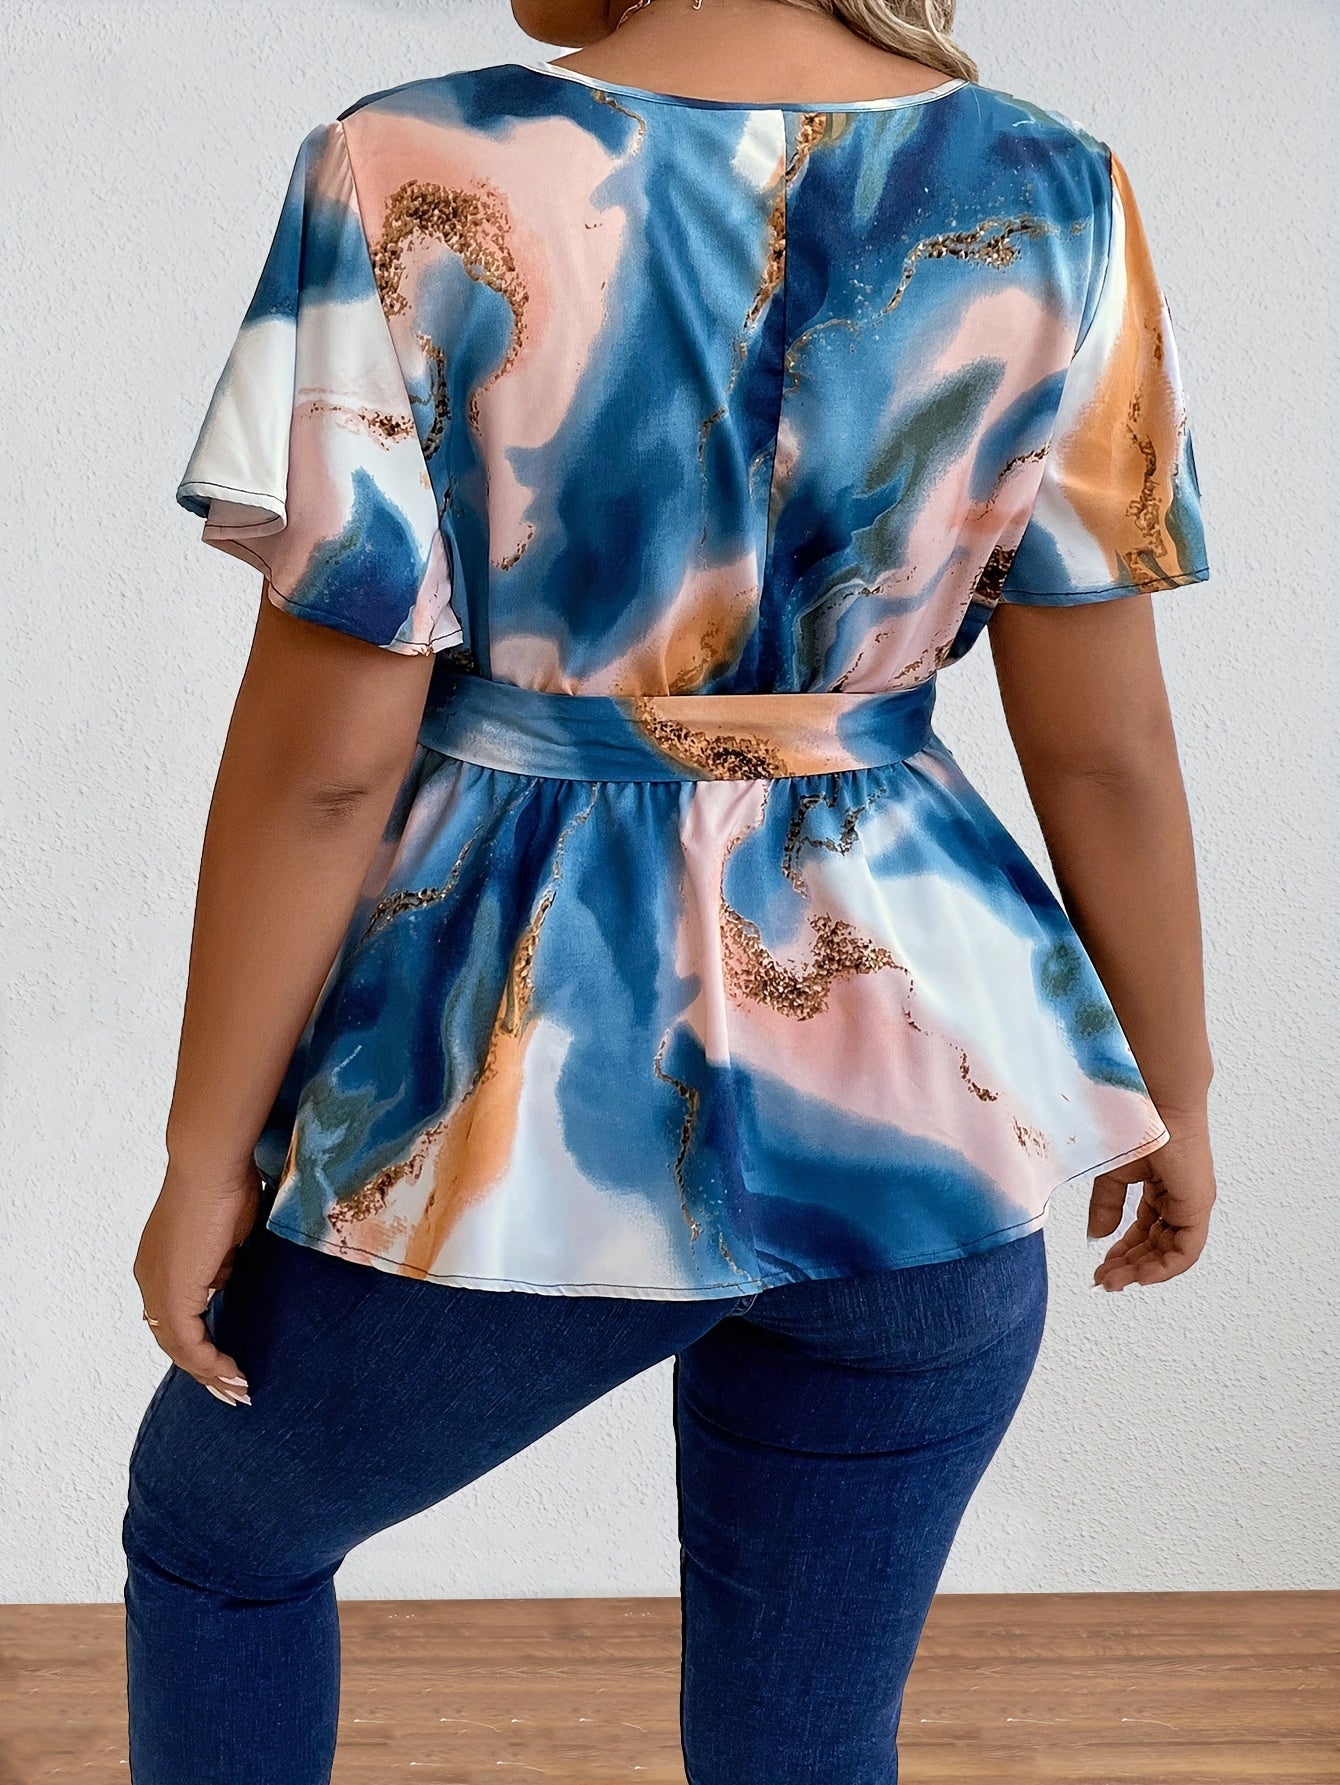 Plus Size Elegant V-Neck Belted Flutter Sleeve Surplice Tie Dye Blouse - Non-Stretch Polyester Color Block Print-Free Woven Top for Summer - Womens Stylish Comfortable Casual Wear